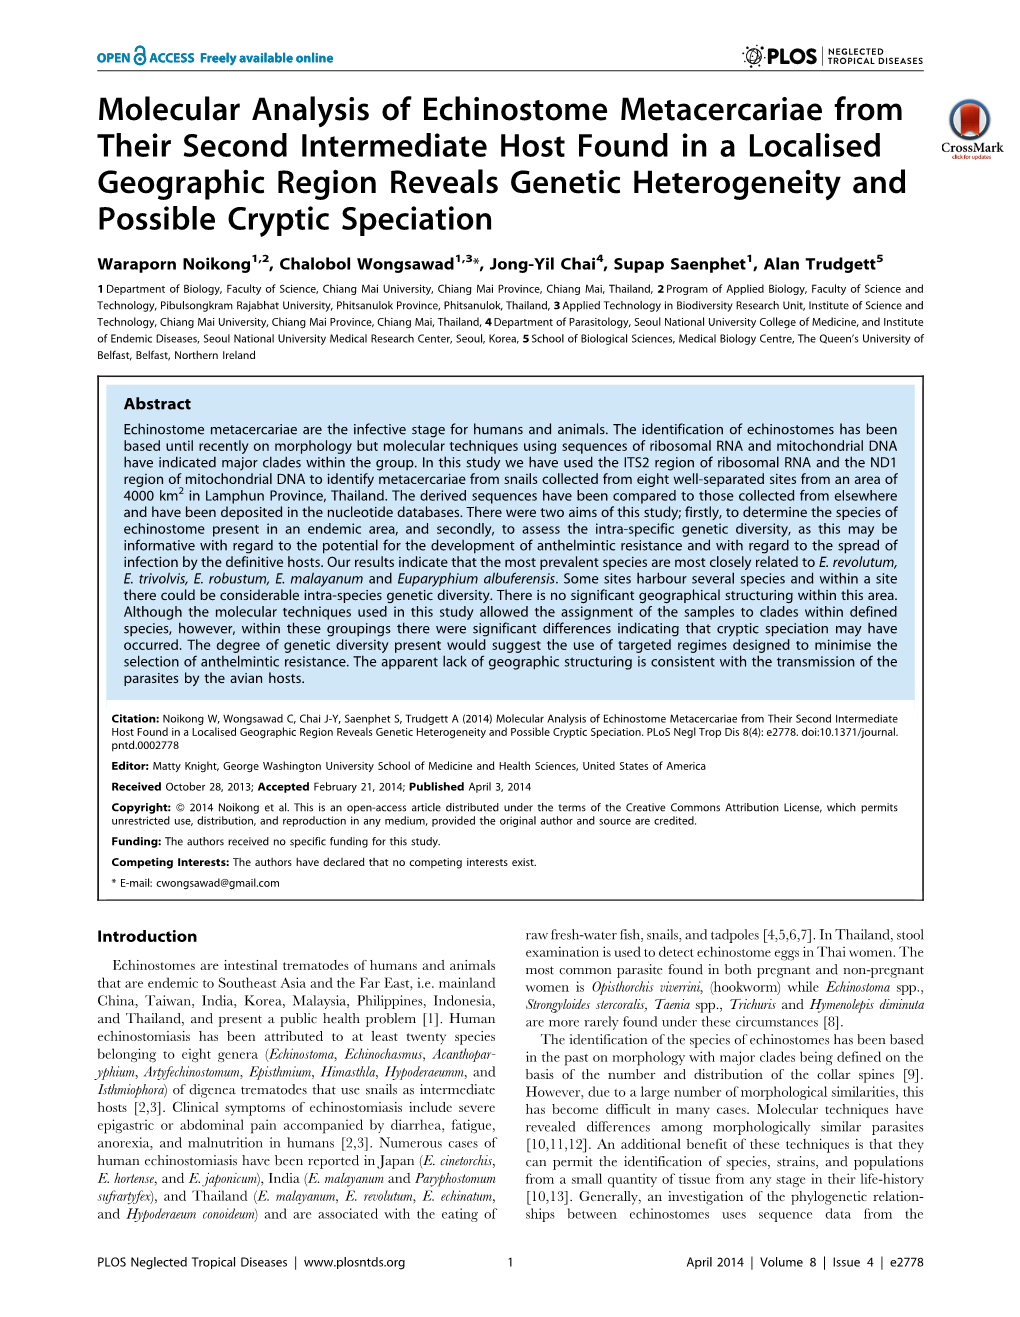 Molecular Analysis of Echinostome Metacercariae from Their Second Intermediate Host Found in a Localised Geographic Region Revea